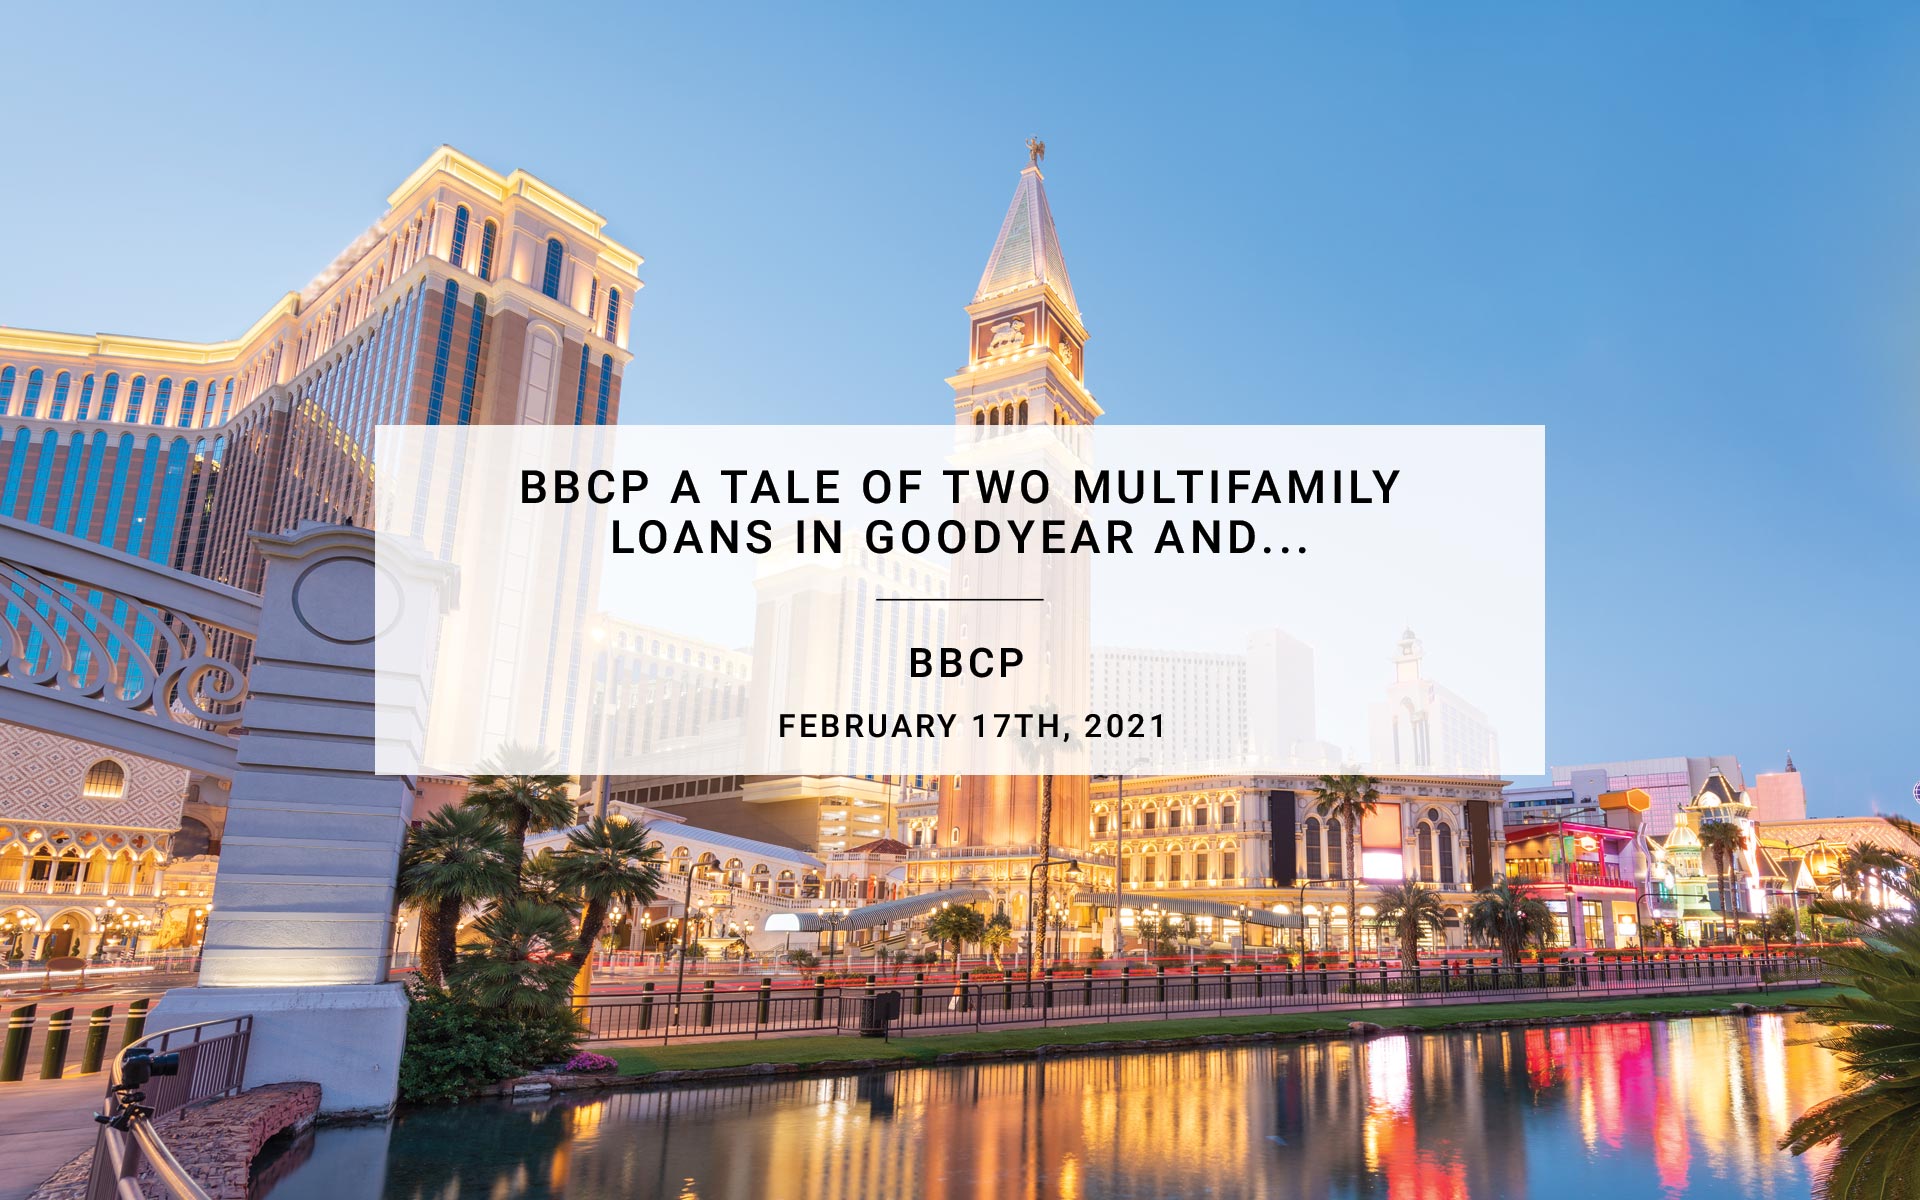 BBCP A Tale of Two Multifamily Loans in Goodyear and Champaign | BBCP